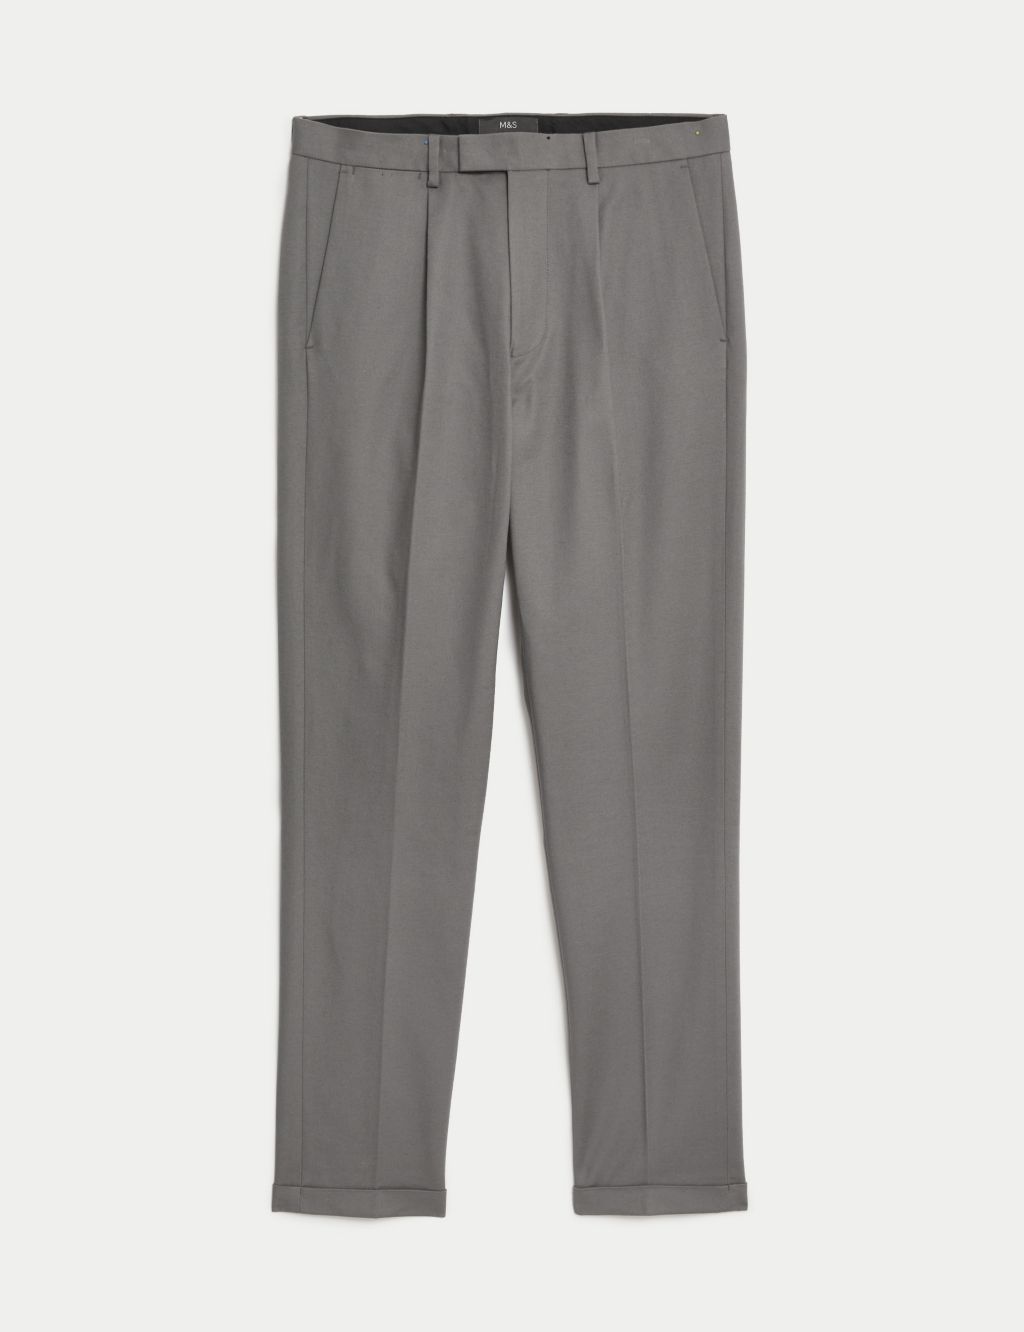 Tapered Fit Smart Stretch Chinos image 2